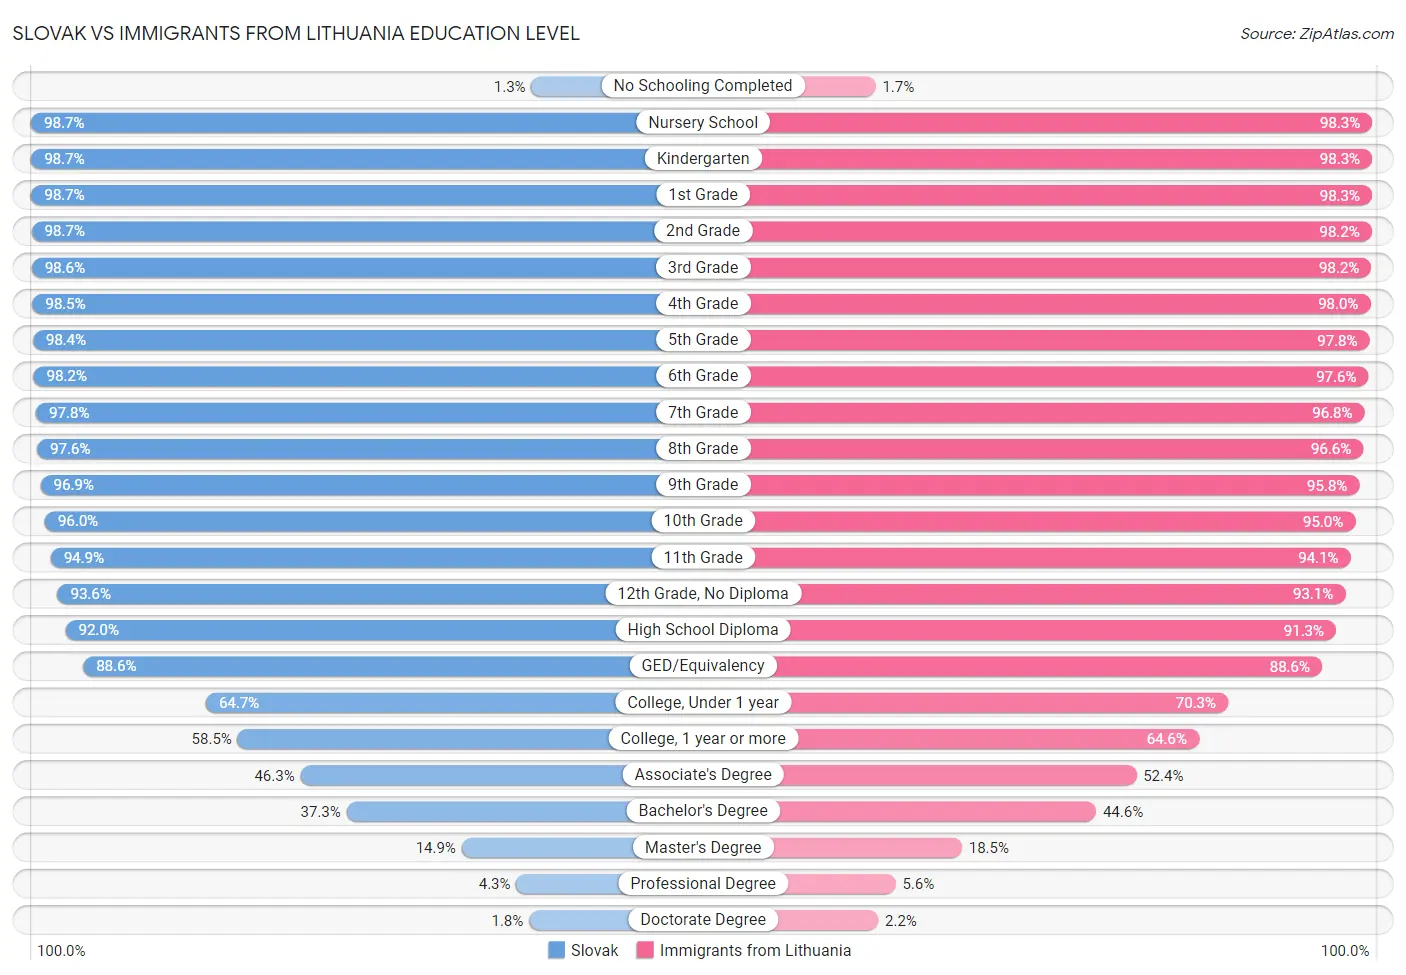 Slovak vs Immigrants from Lithuania Education Level